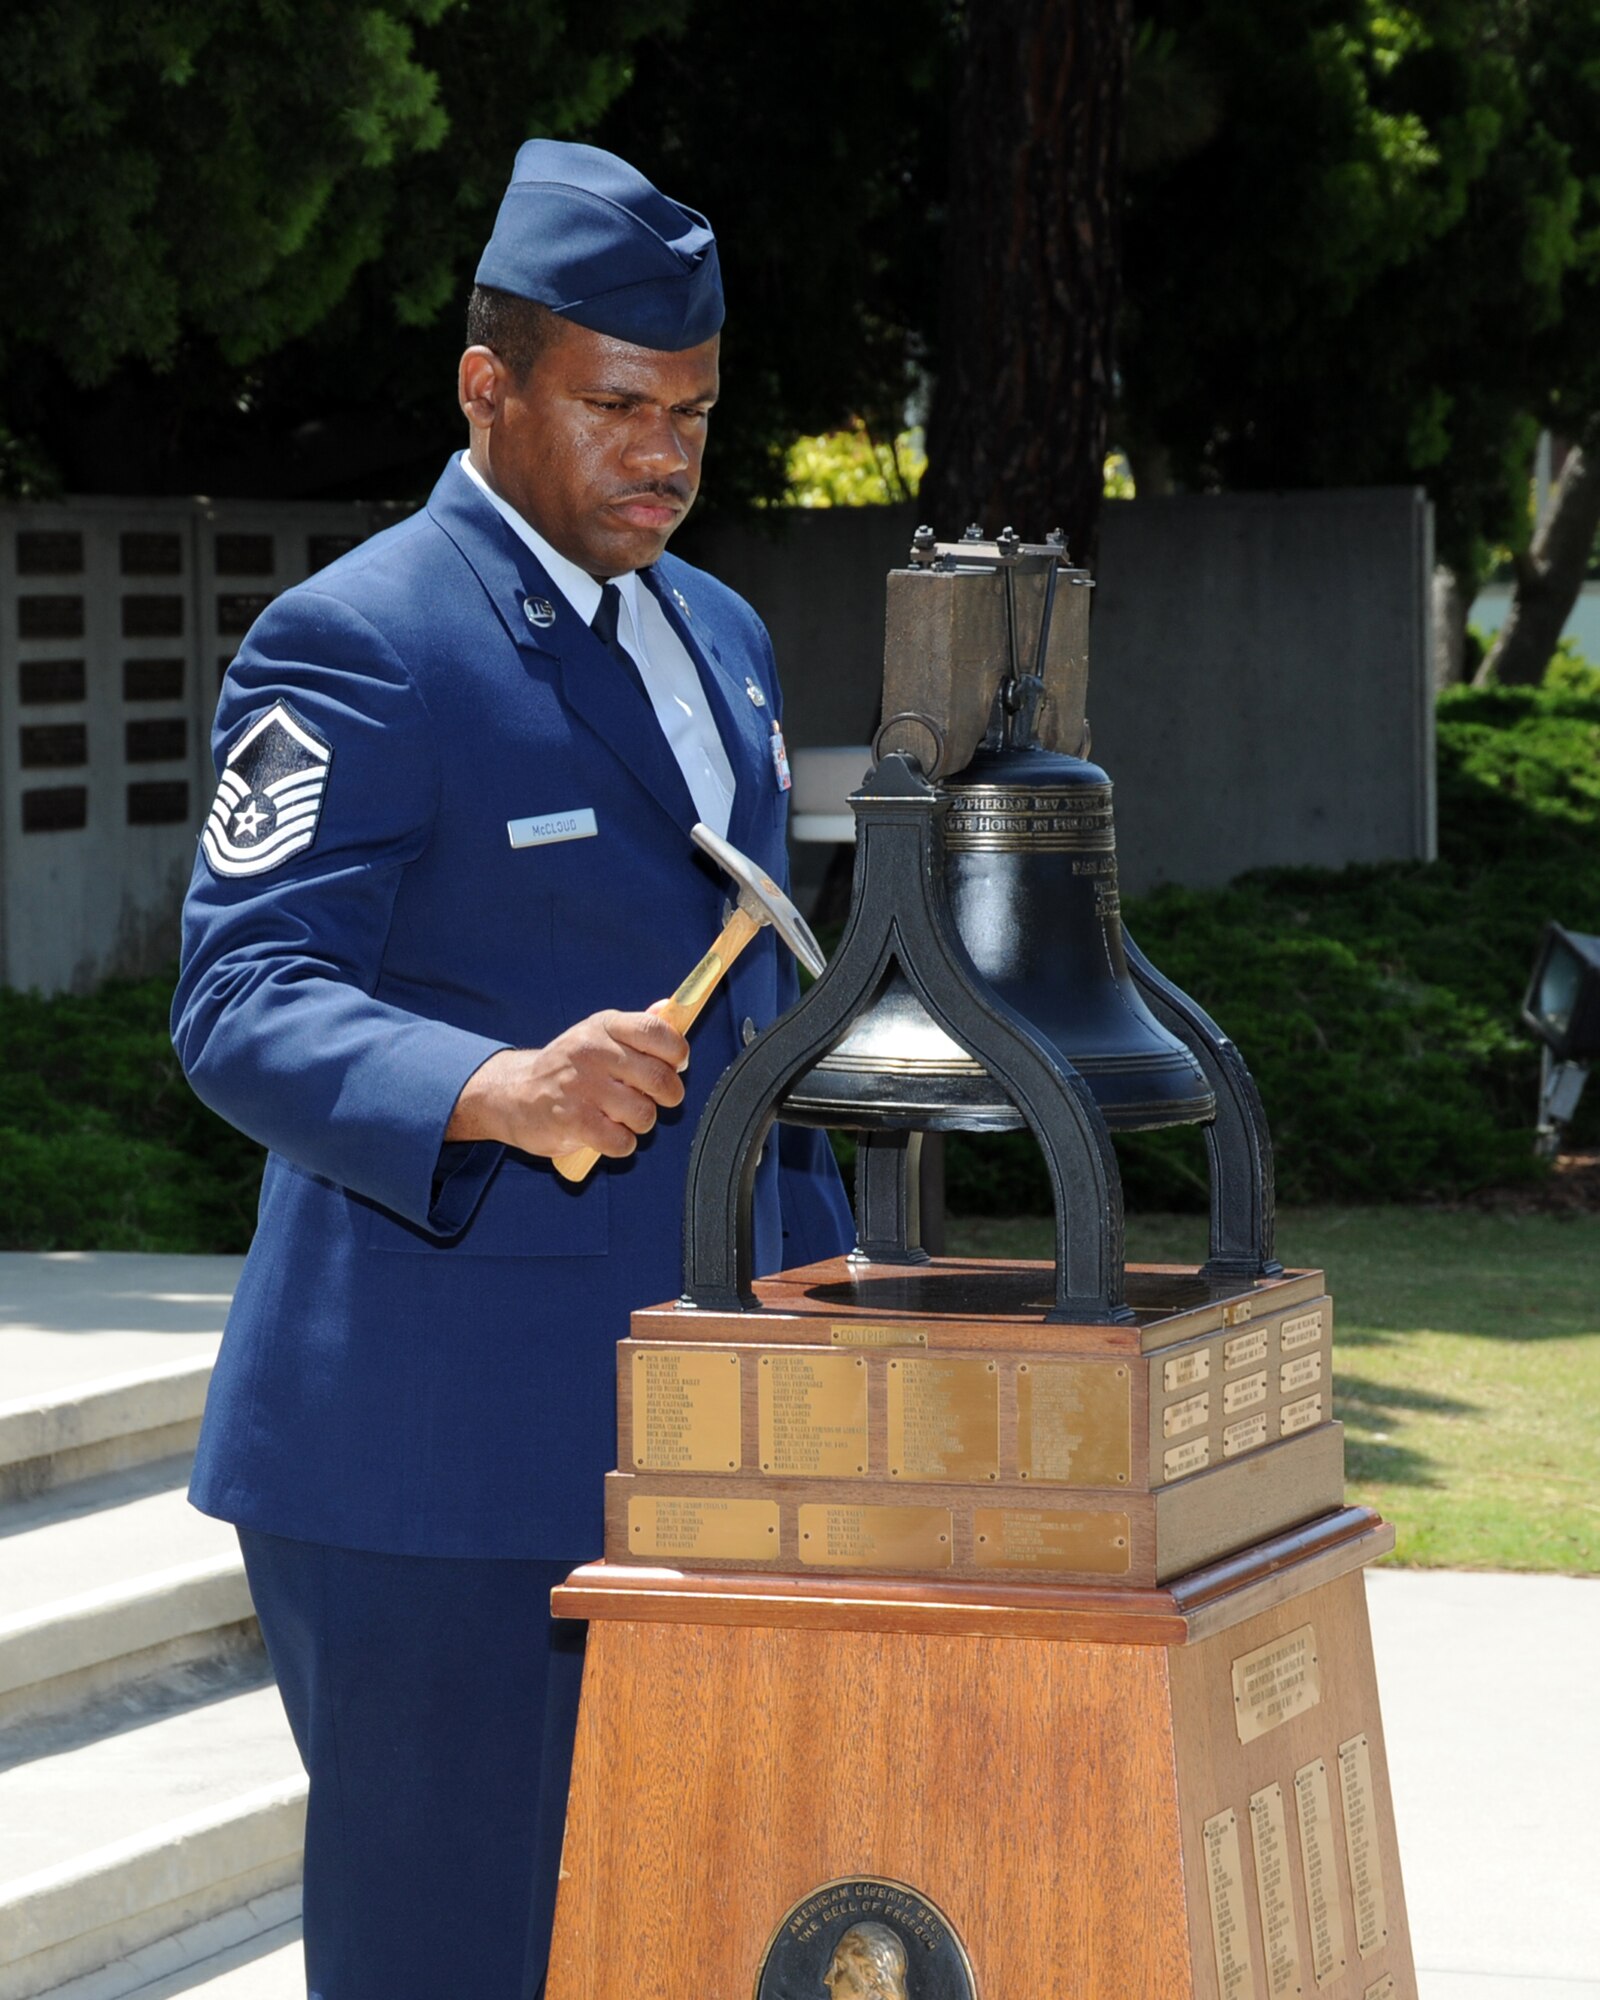 Master Sgt. David McCloud, 61st Air Base Wing, rings a bell at the City of Gardena's Flag Day Ceremony, June 14.  The master sergeant represented the Air Force at the ceremony, which commemorates the adoption of the U.S. flag in 1777. President Woodrow Wilson designated June 14 as Flag Day. (Photo by Lou Hernandez)